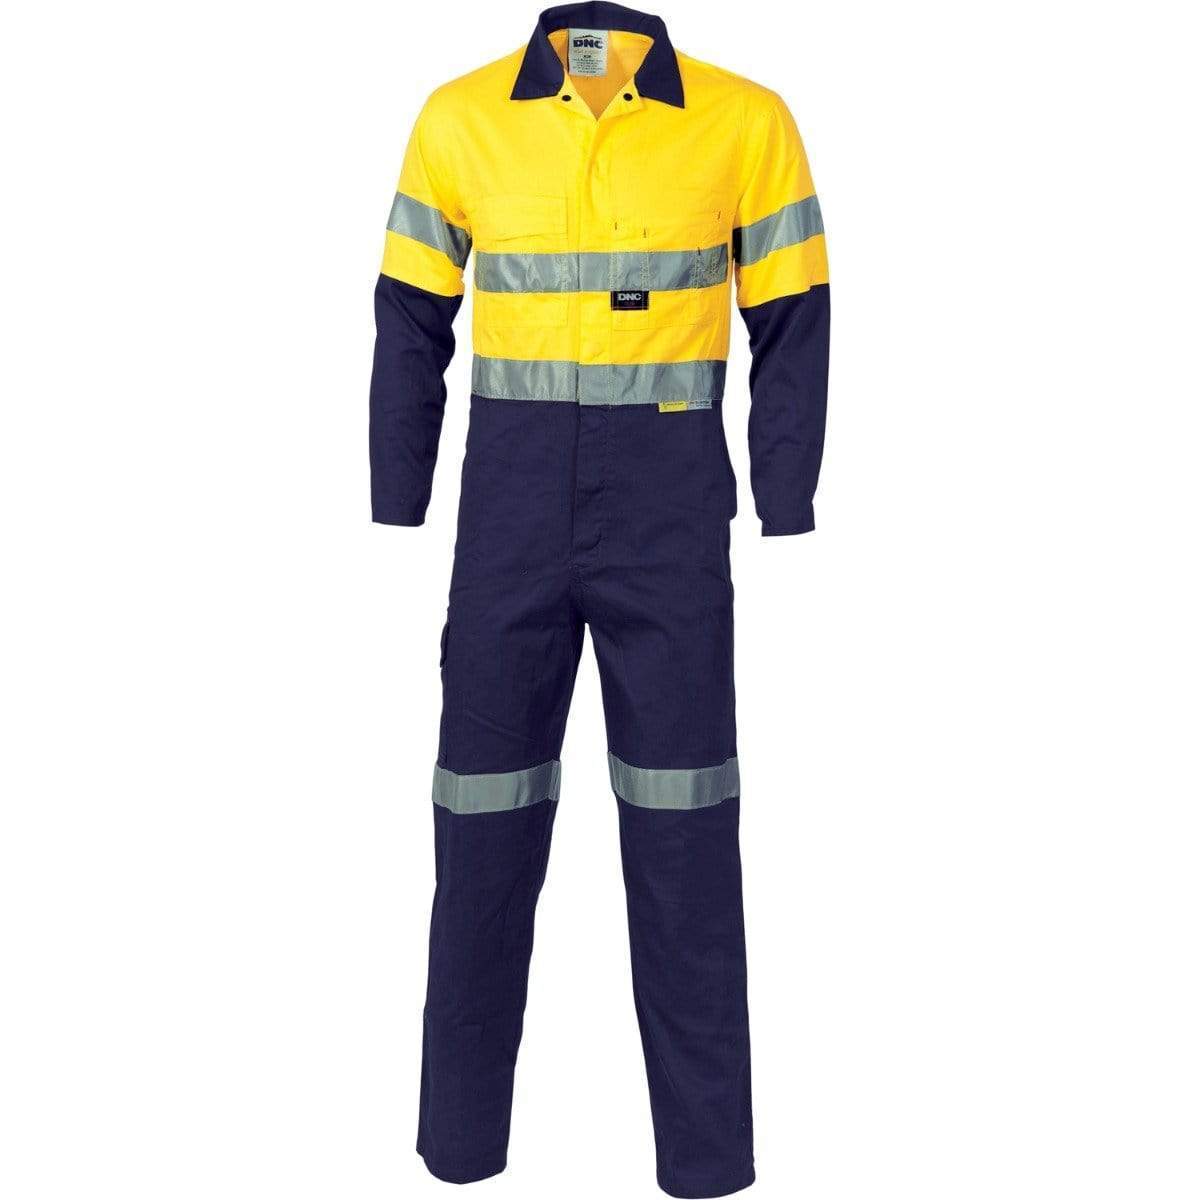 Dnc Workwear Hi-vis Cool-breeze Two-tone Lightweight Cotton Coverall With 3m Reflective Tape - 3955 Work Wear DNC Workwear Yellow/Navy 77R 